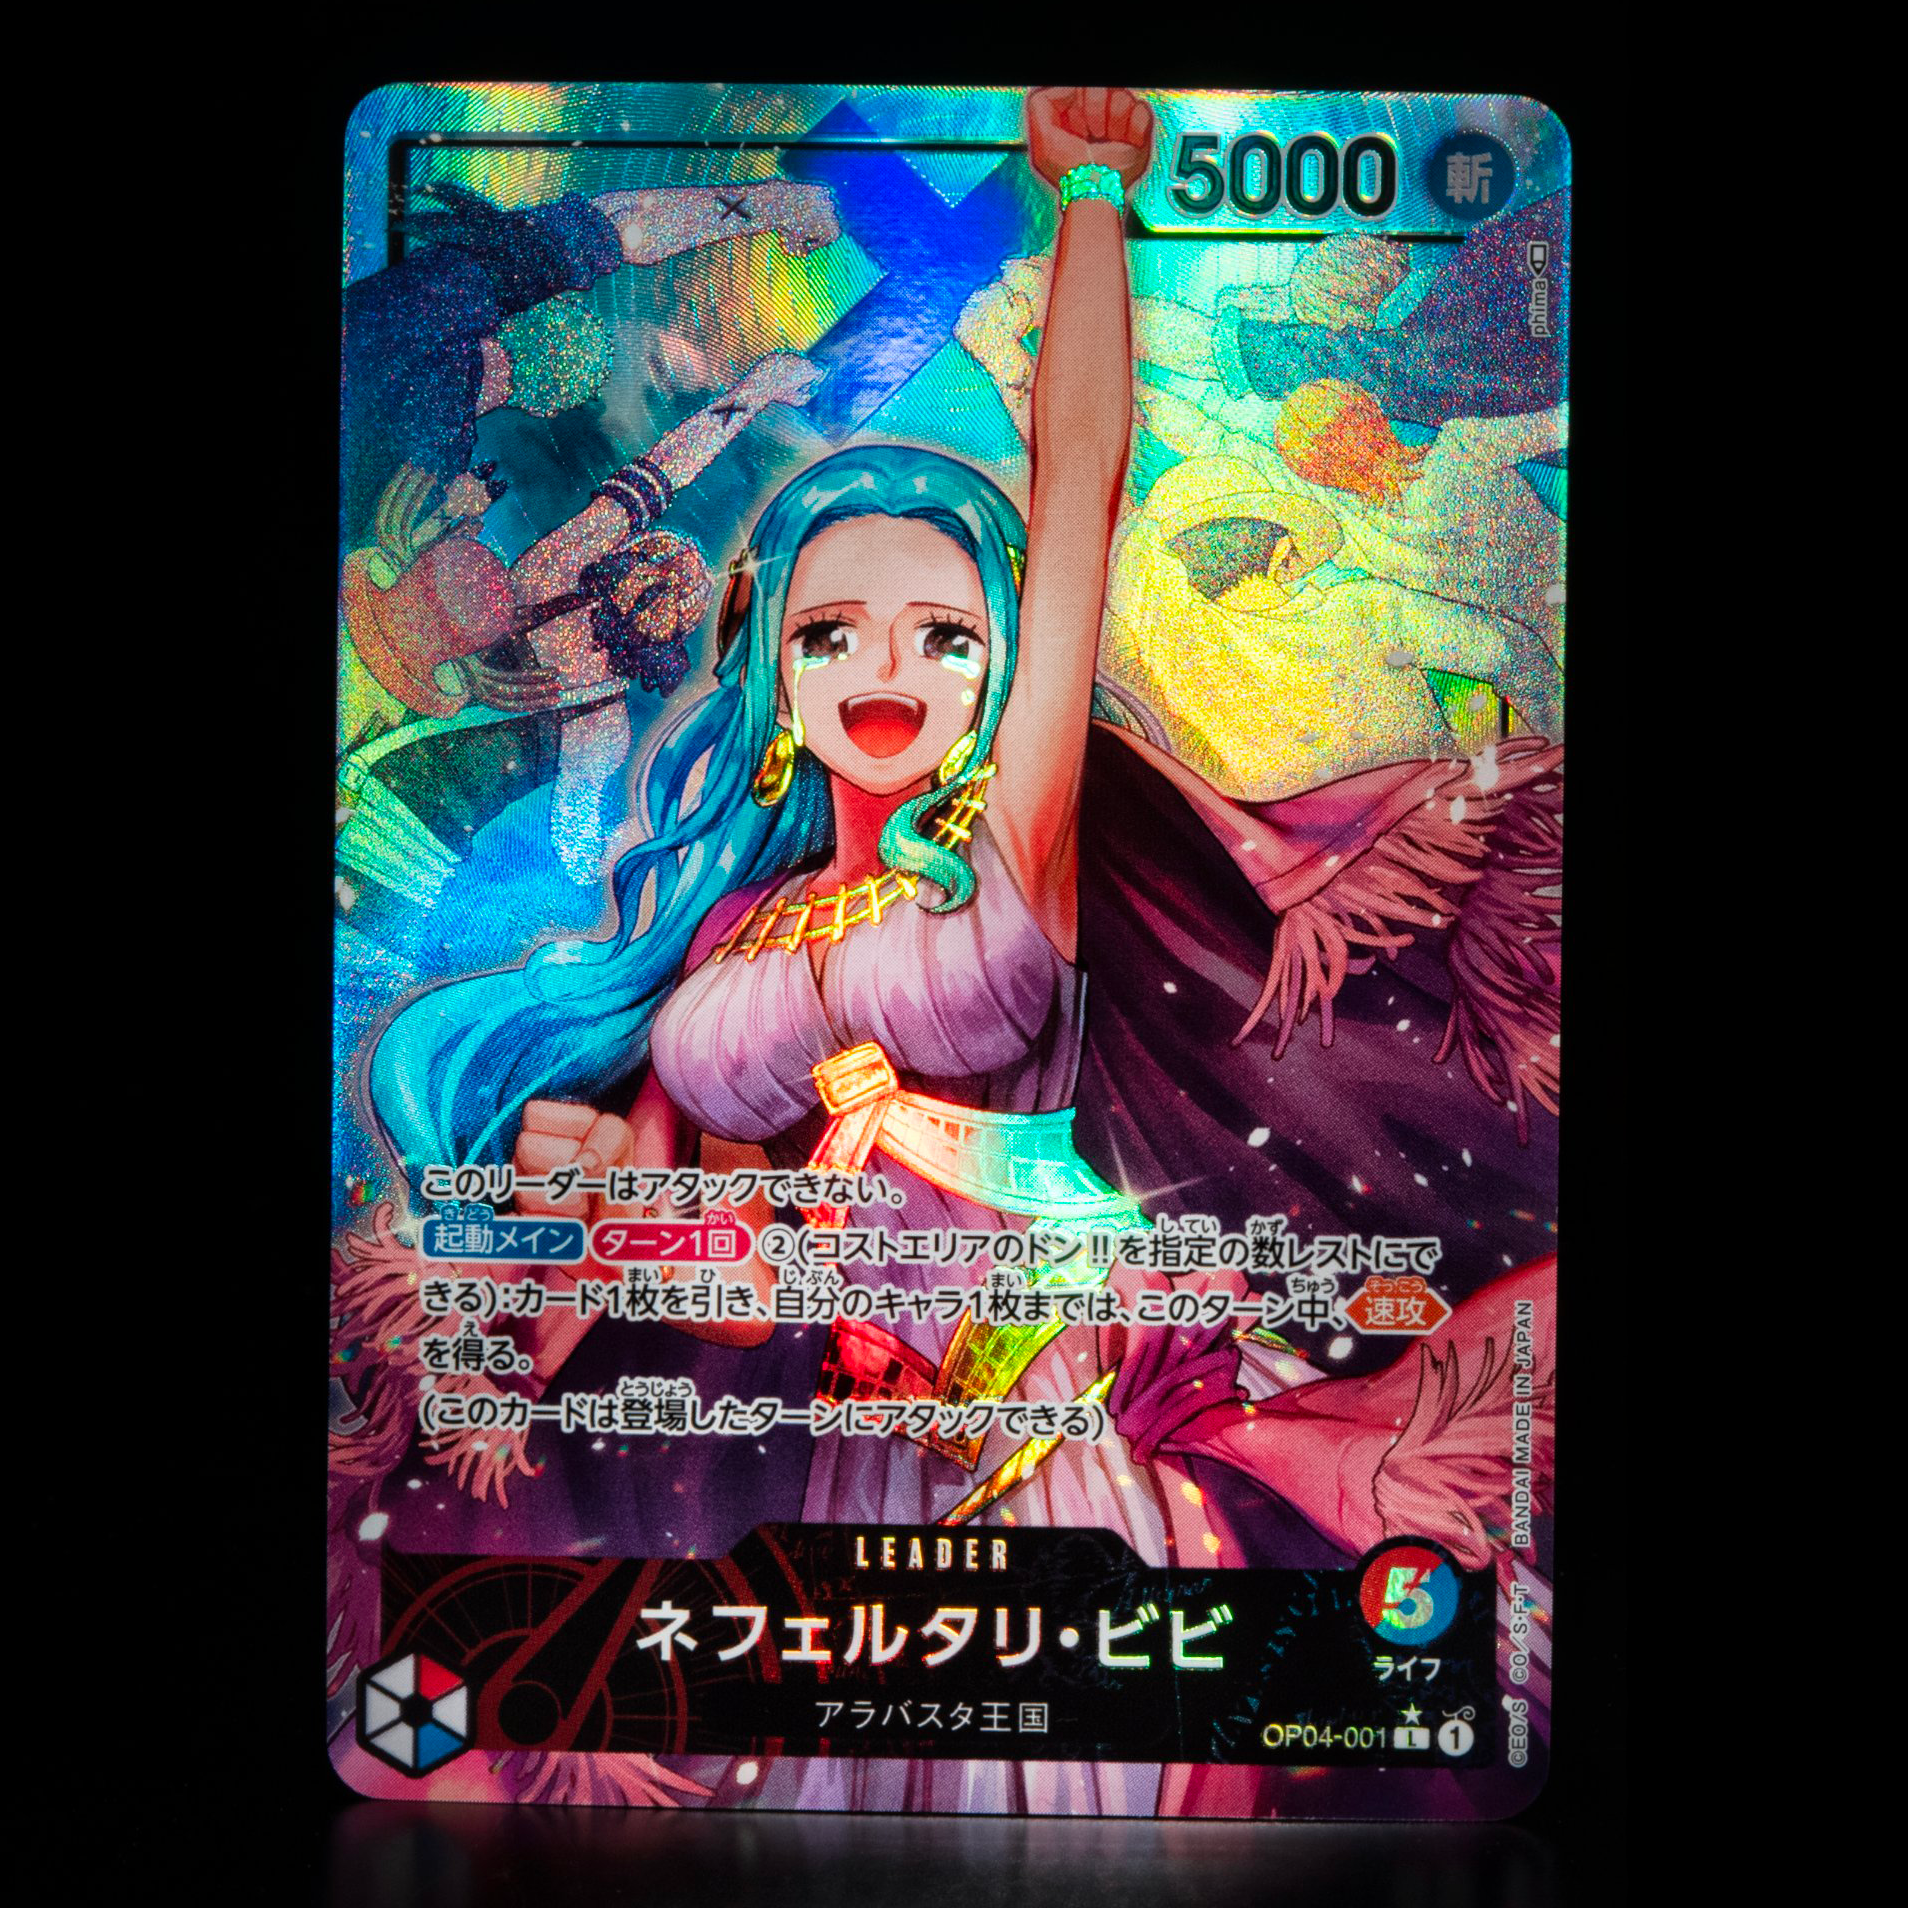 ONE PIECE CARD GAME ｢Kingdoms of Intrigue｣  ONE PIECE CARD GAME OP04-001 Leader Parallel card  Nefeltari Vivi